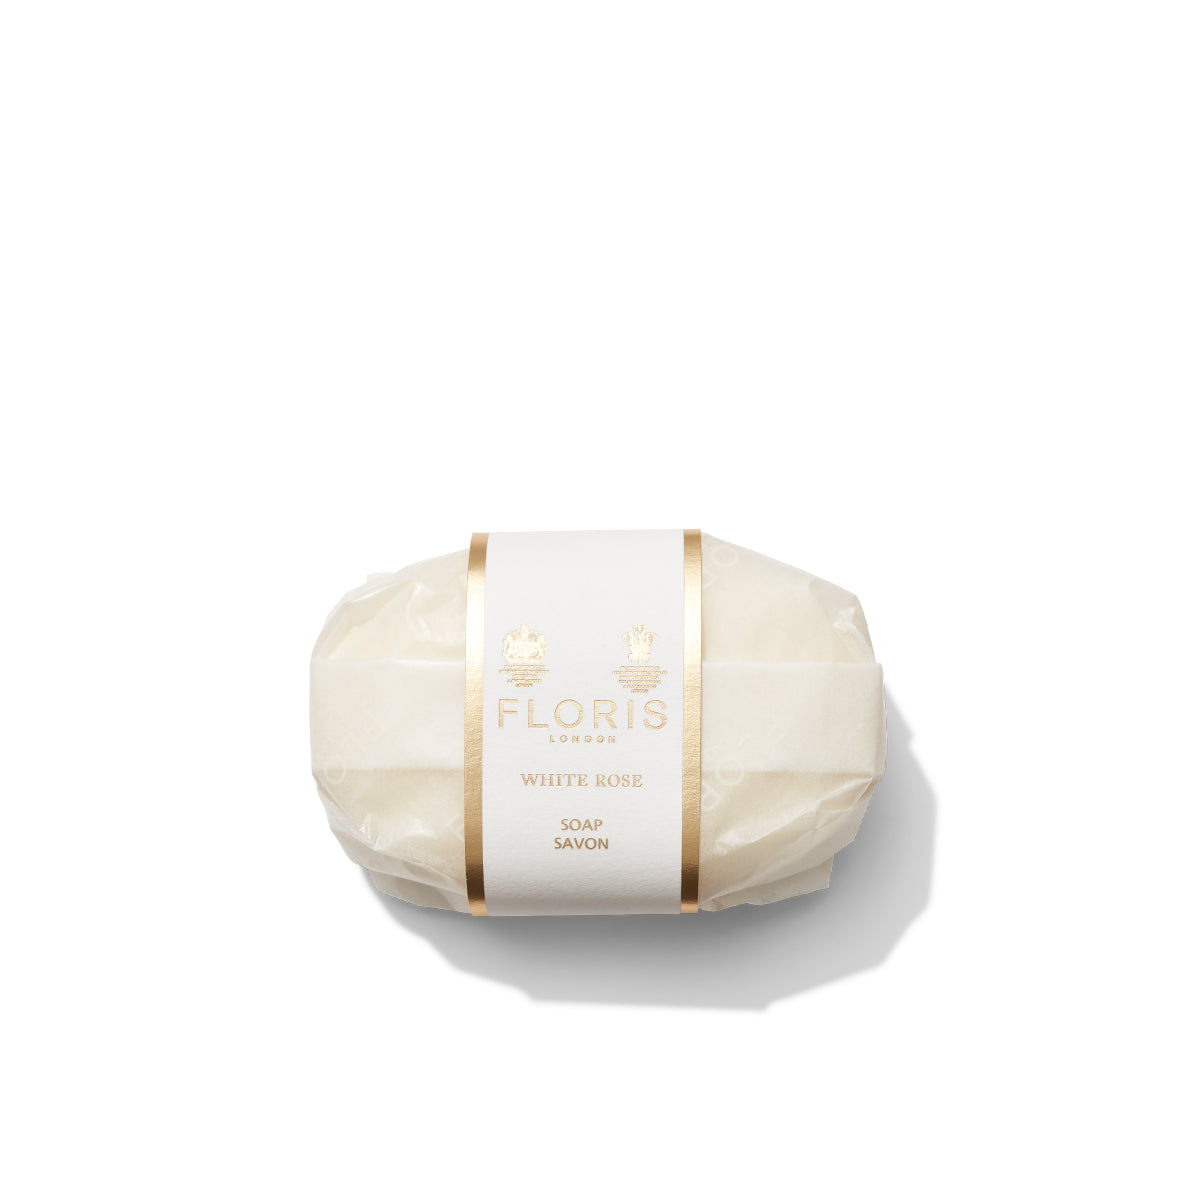 A wrapped Floris London White Rose - Luxury Soap bar, enriched with shea butter and adorned with gold accents, set against a pristine white background.